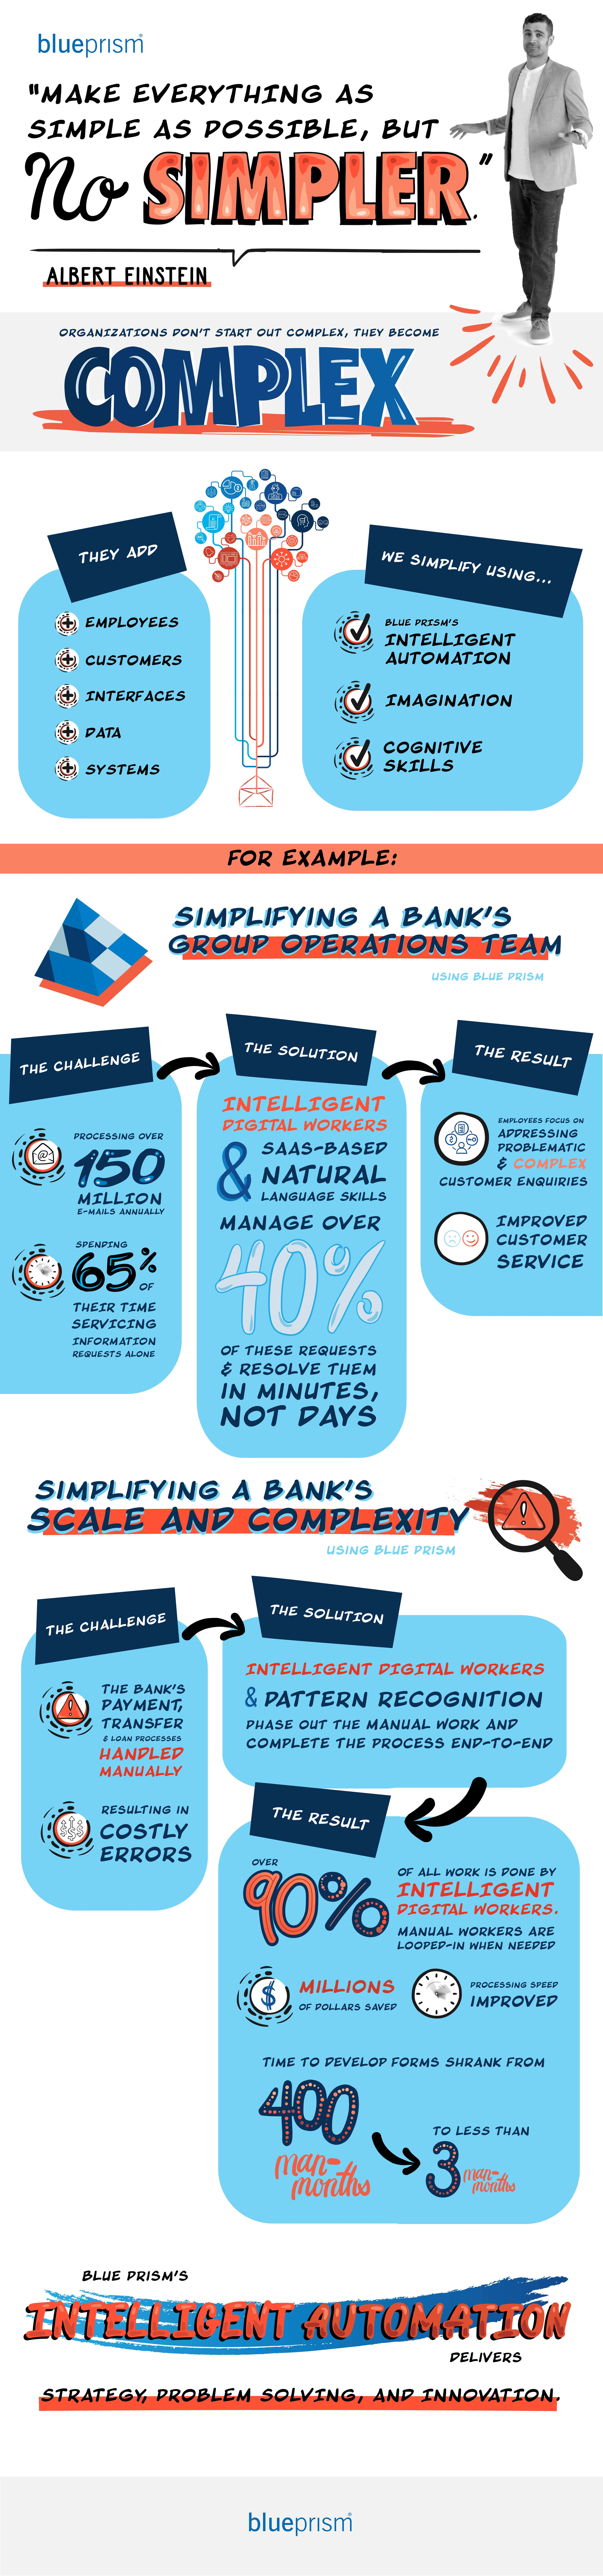 Keep it simple: Reduce Complexity with RPA - Infographic